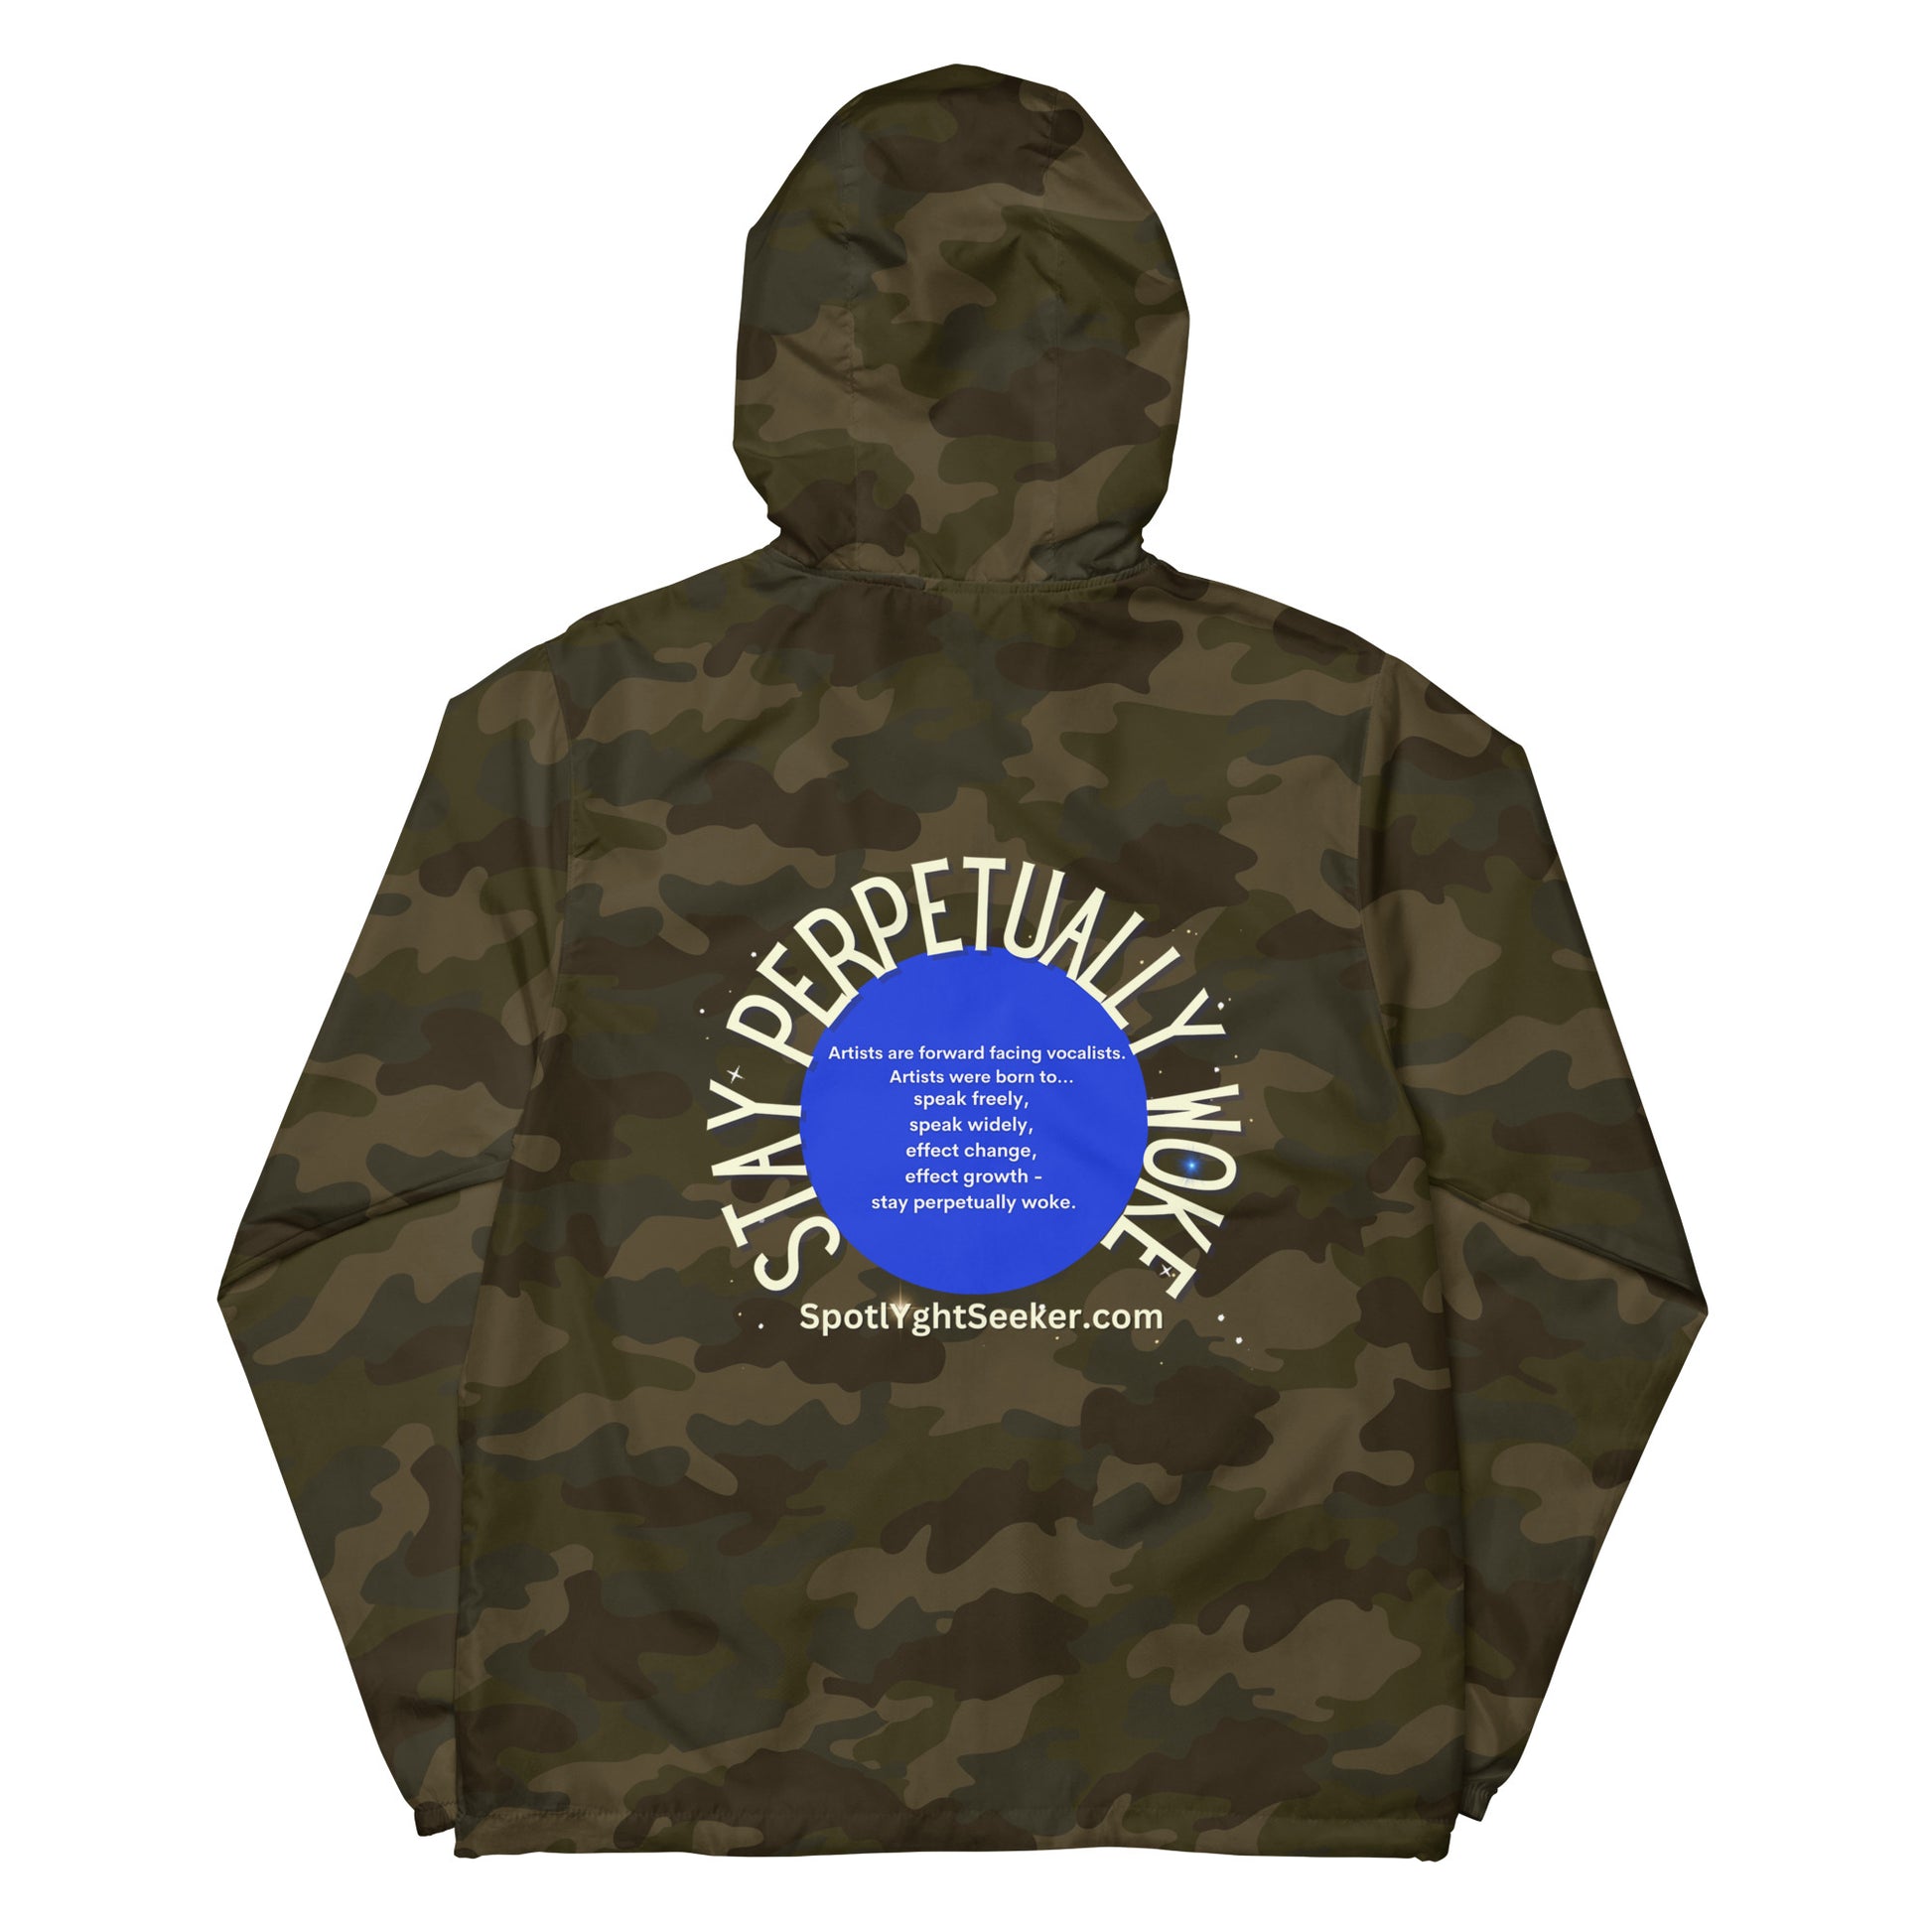 Stay Perpetually Woke' Artist Windbreaker - Embodying creativity, confidence, and artistic expression.